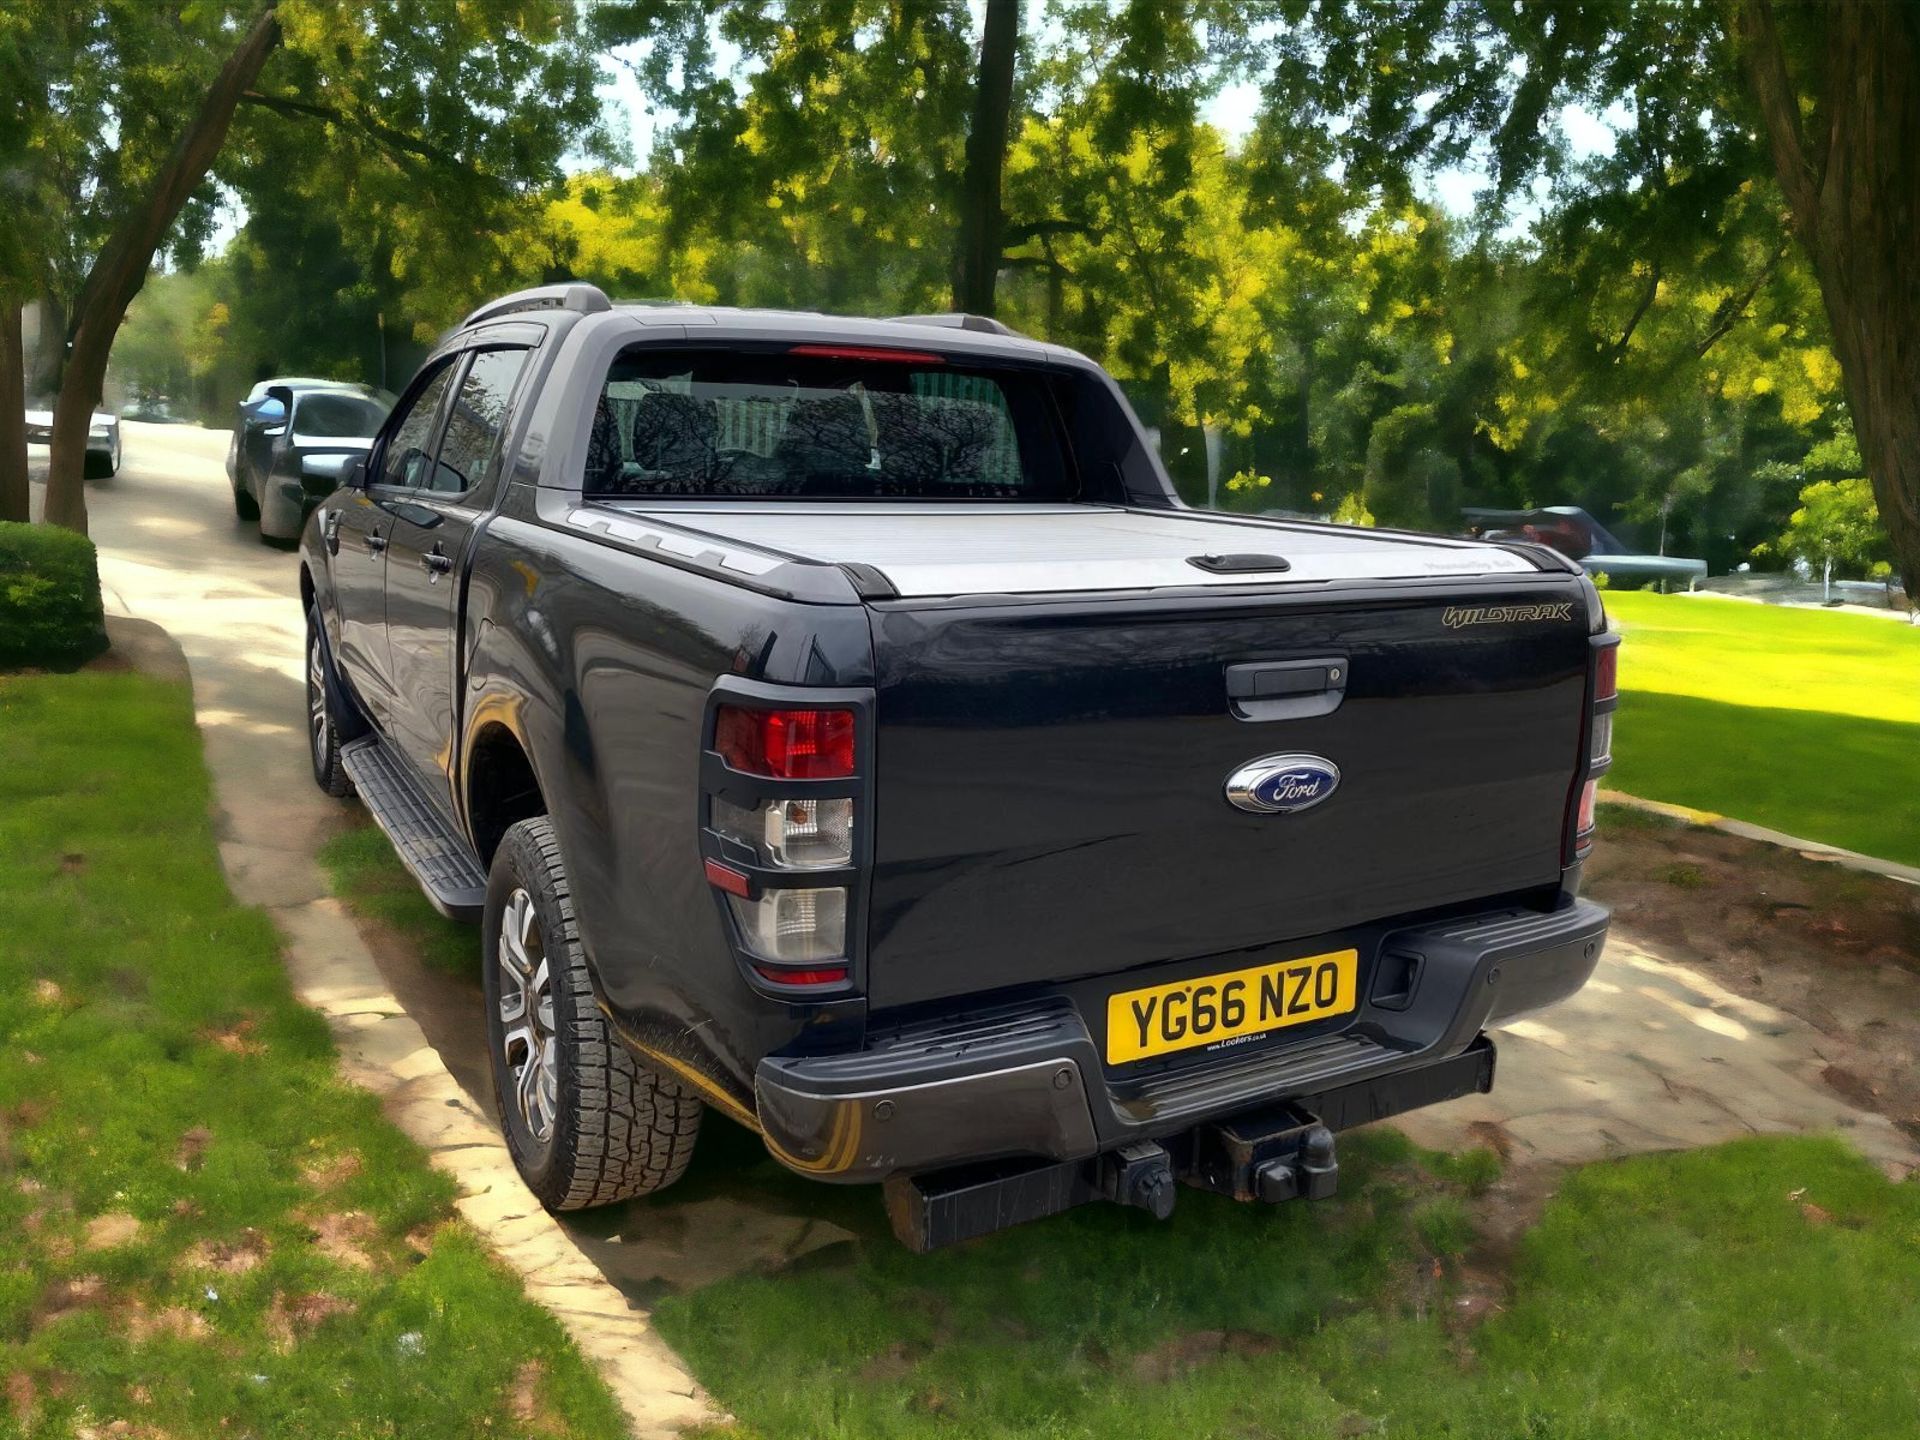 2016 FORD RANGER 3.2 TDCI WILDTRAK AUTO DOUBLE CAB 4X4 >>--NO VAT ON HAMMER--<< - Image 6 of 12